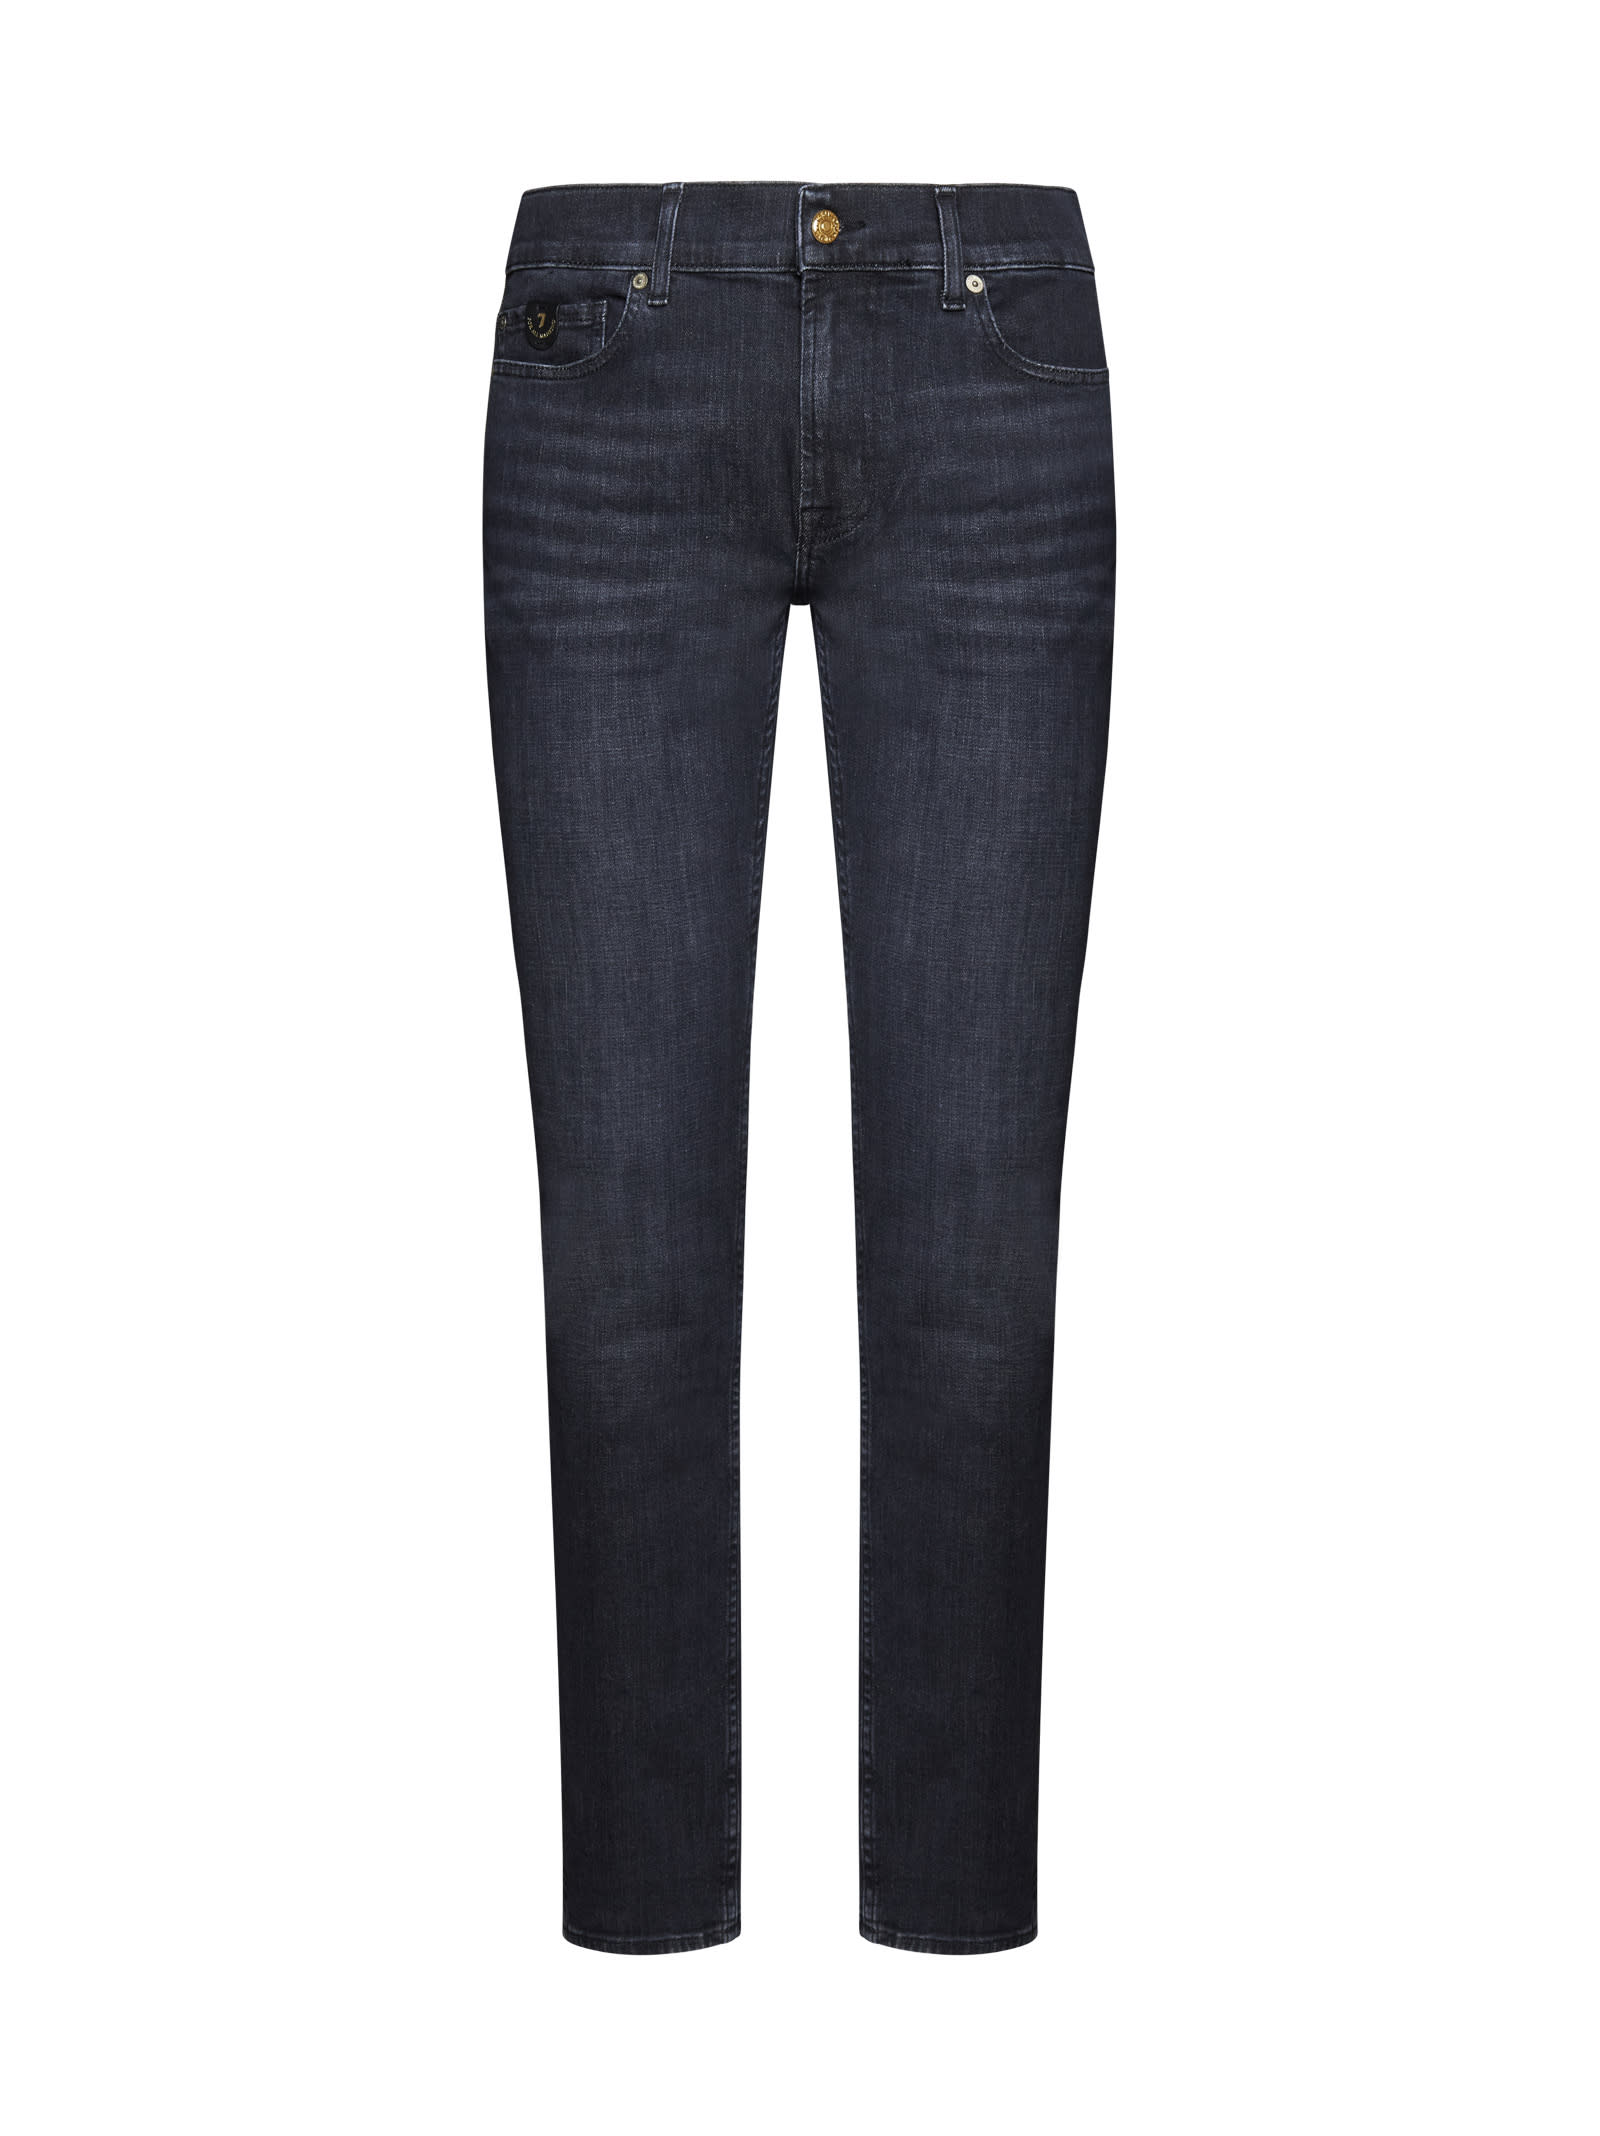 Shop 7 For All Mankind Jeans In Black